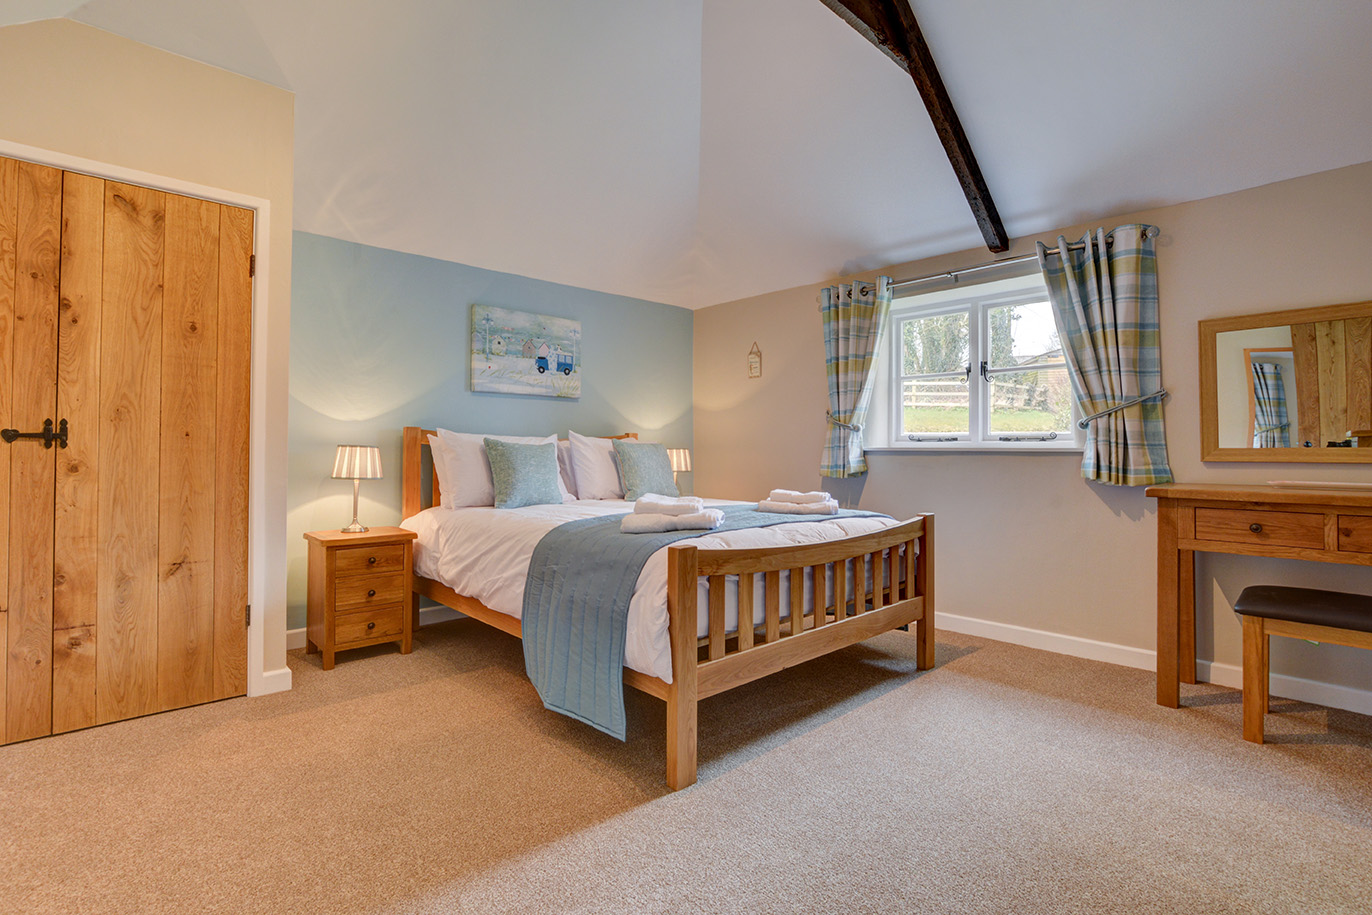 The second bedroom of Goosehill luxury self catering converted barn holiday cottage at Penrose Burden in North Cornwall 02.jpg